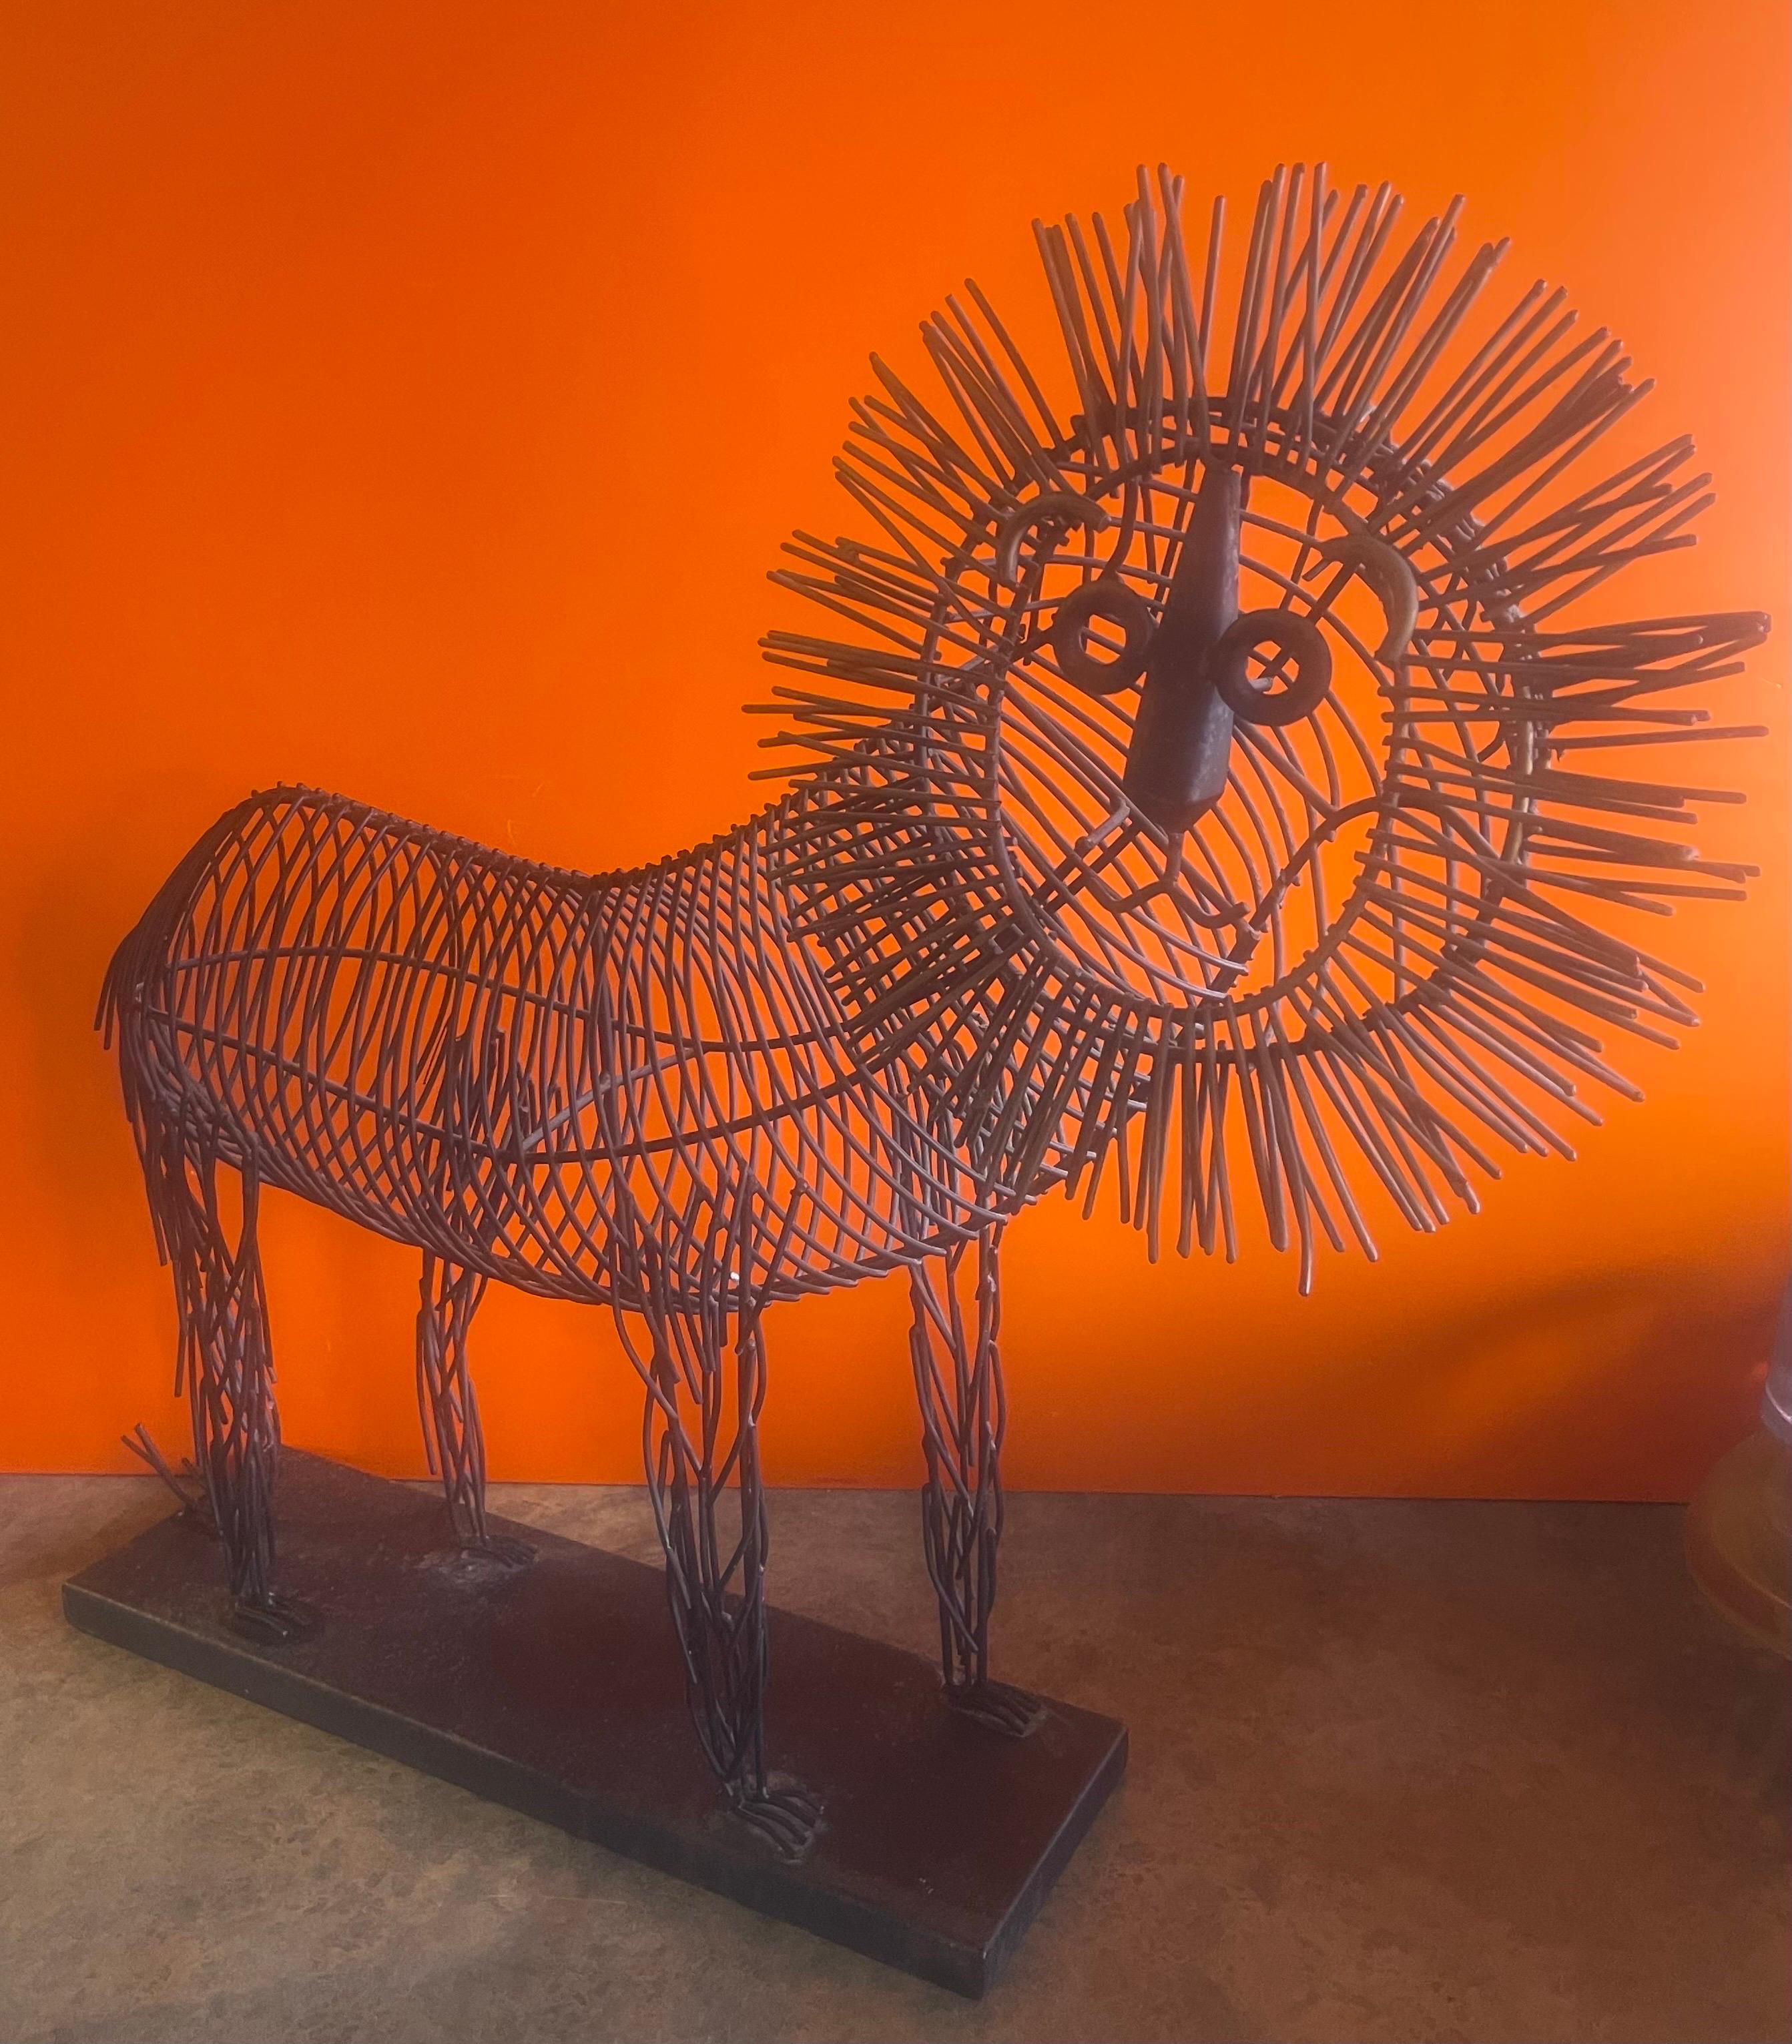 Large whimsical metal wire lion sculpture in the style of C. Jere, circa 1990s. The body is black metal wire and the mane is tinted in gold. The piece is in very good vintage condition and measures 26